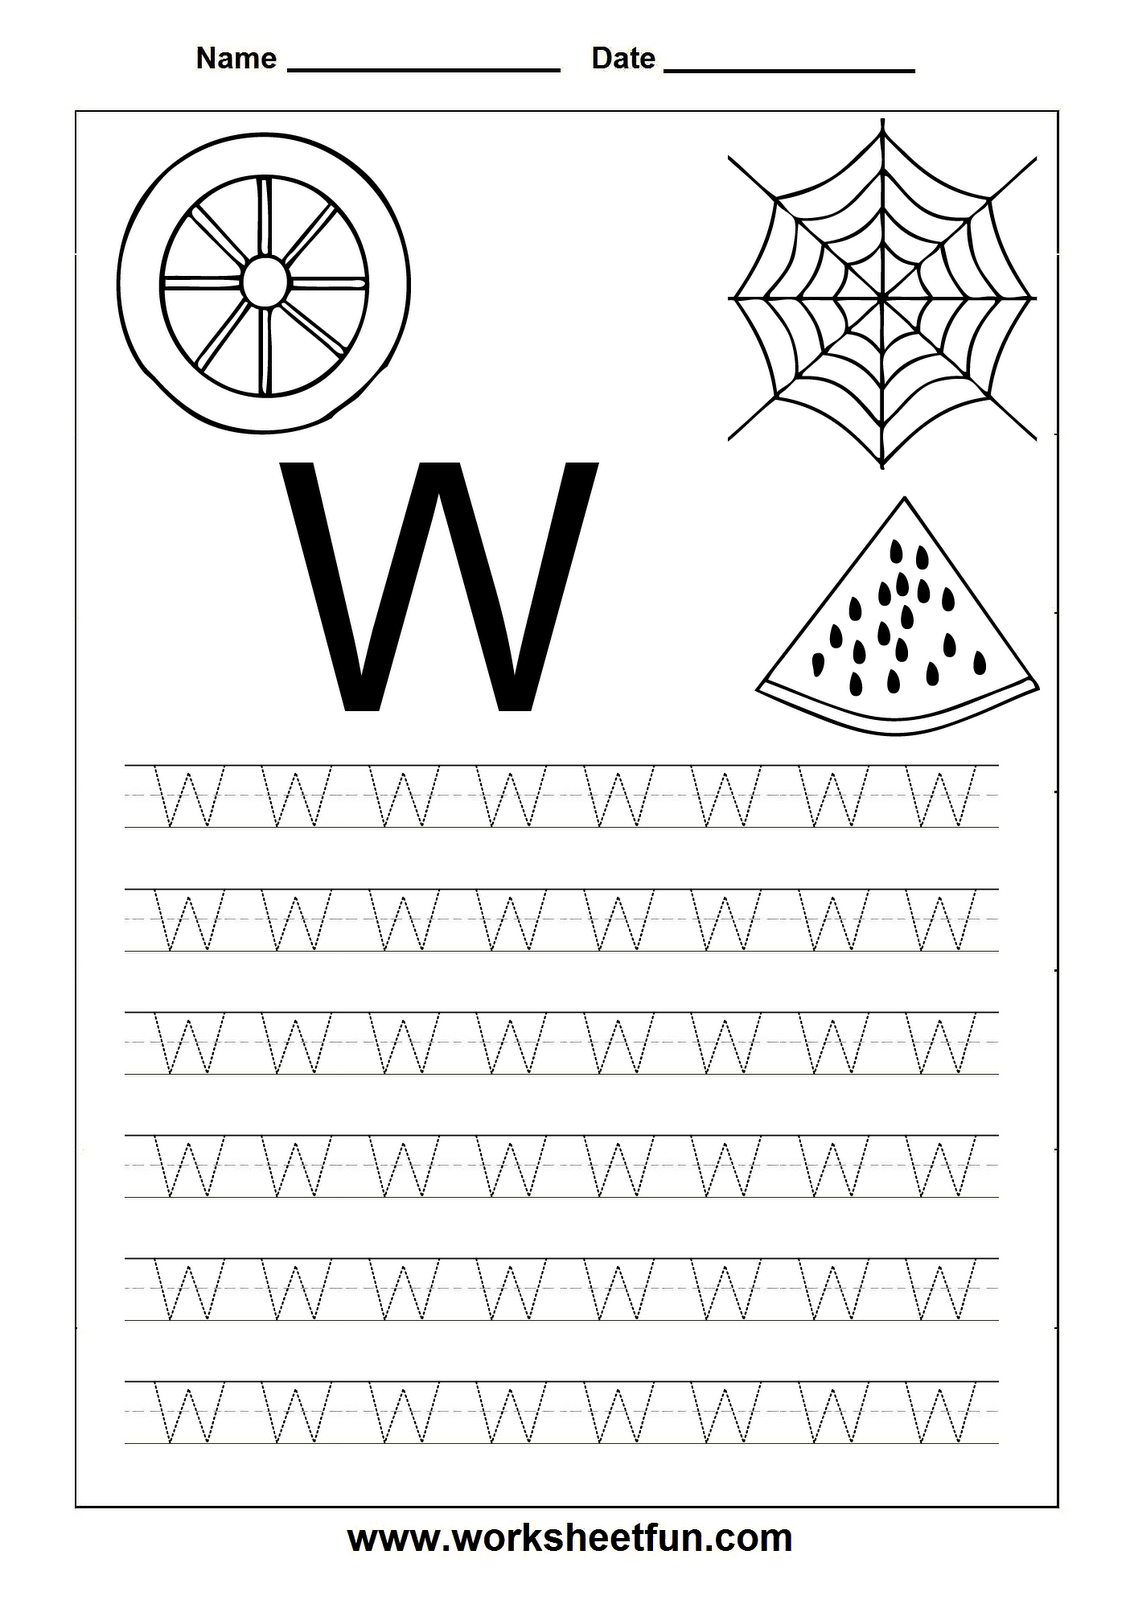 Free Printable Worksheets: Letter Tracing Worksheets For throughout Letter W Tracing Printable